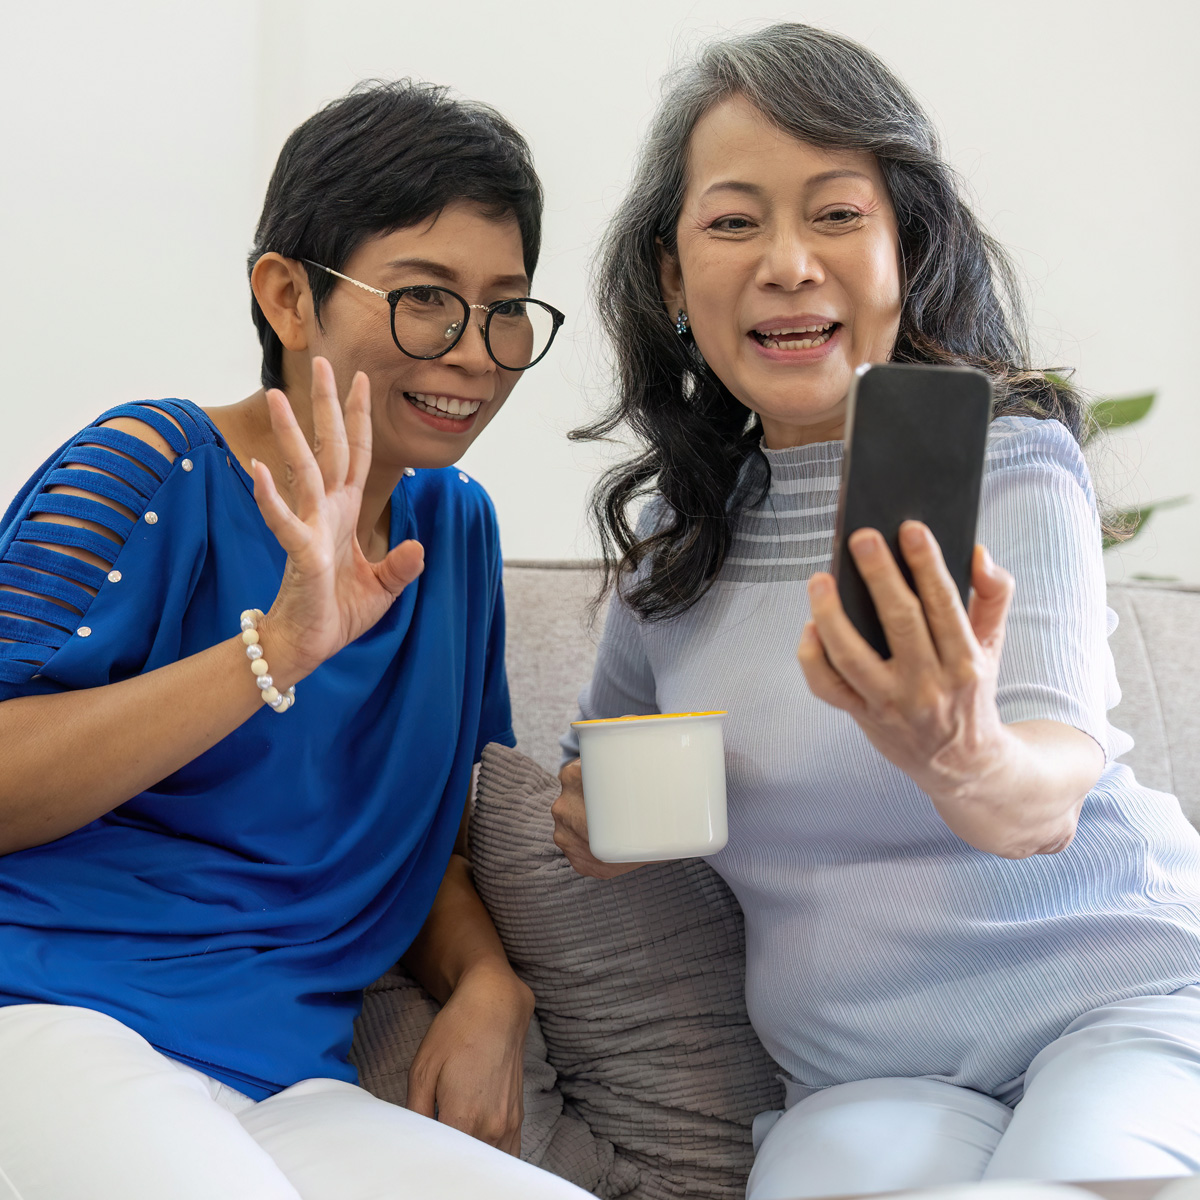 Two women looking at phone smiling and waving